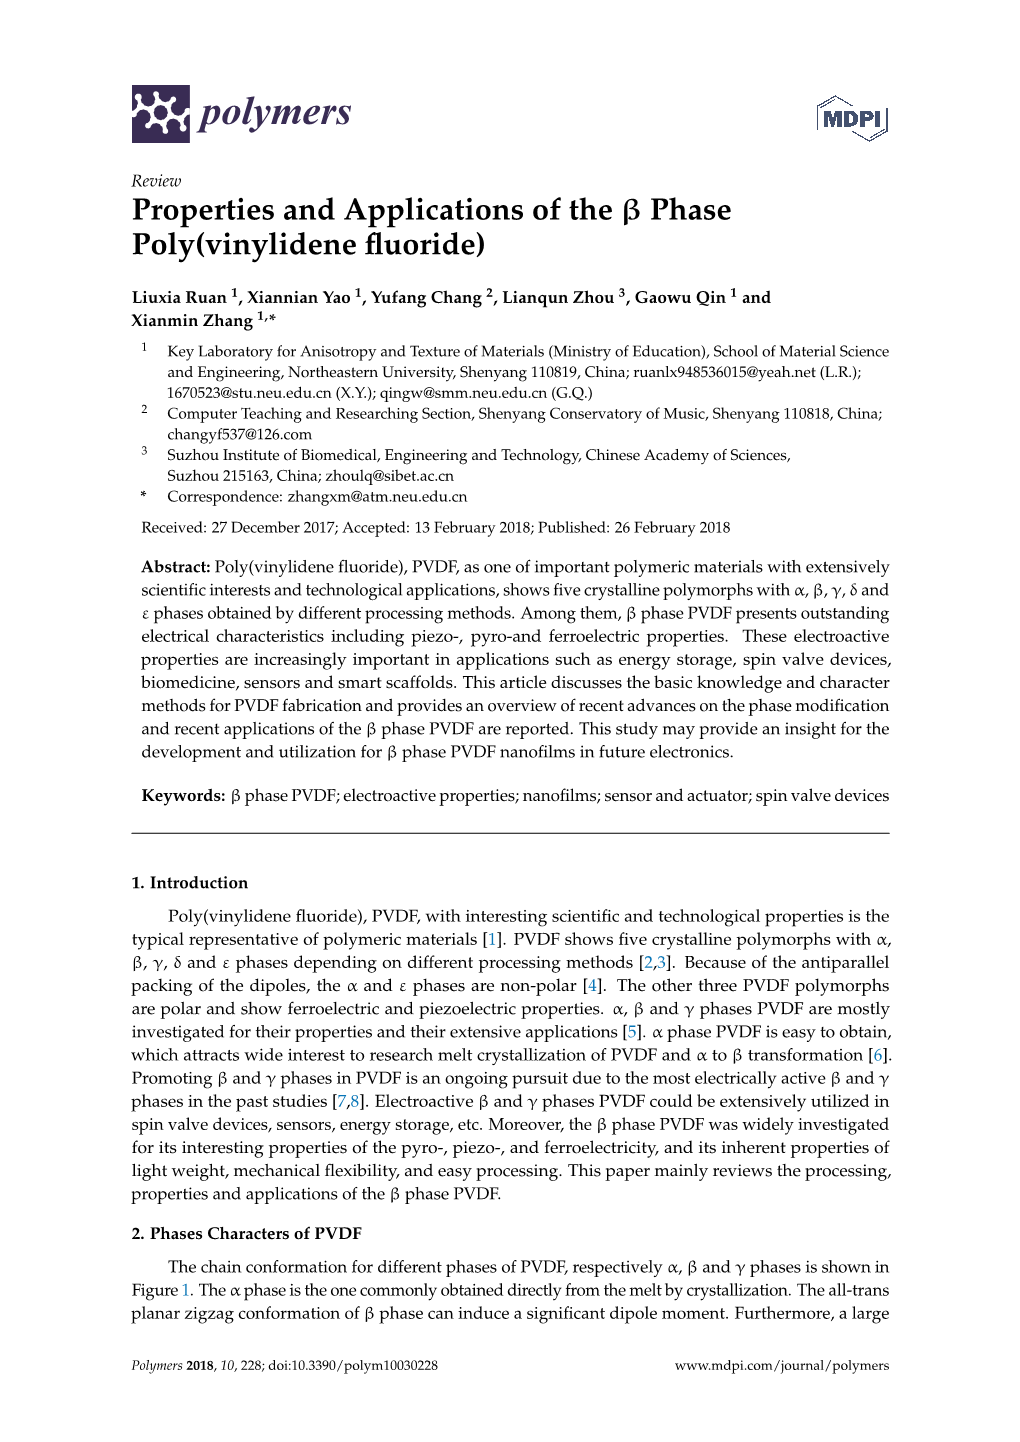 Properties and Applications of the Phase Poly(Vinylidene Fluoride)